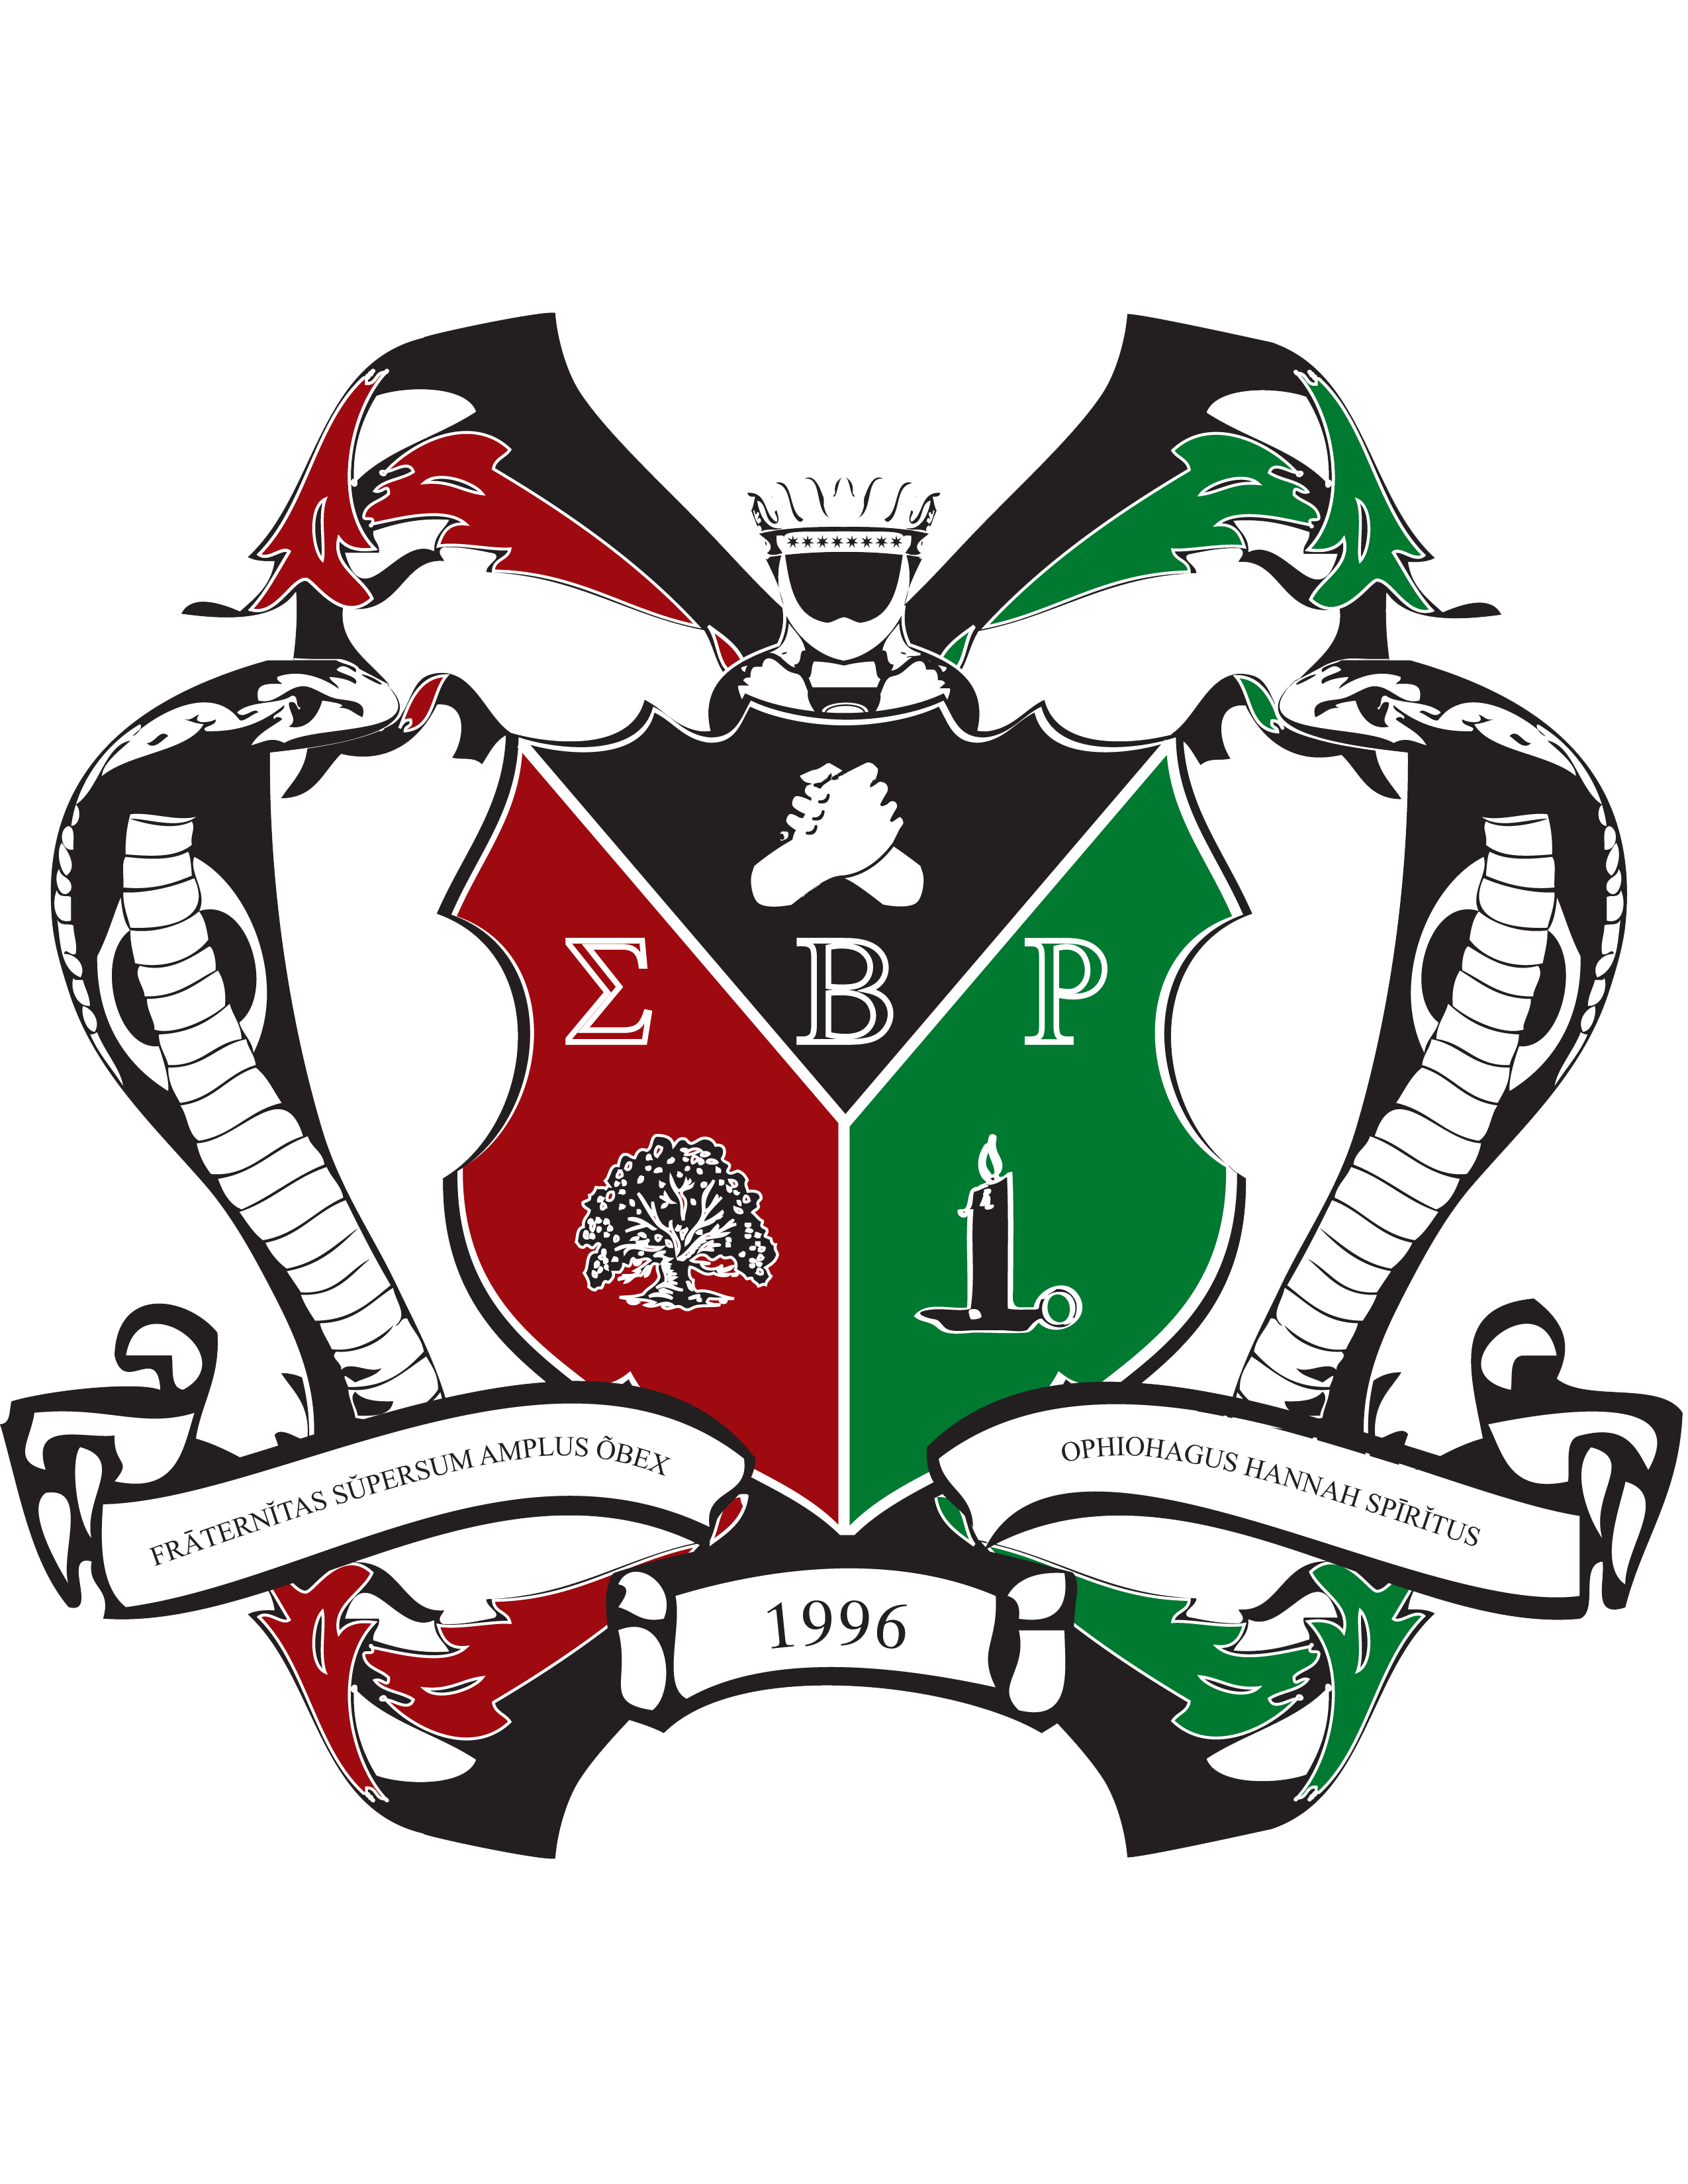 Coat of Arms for Sigma Beta Rho